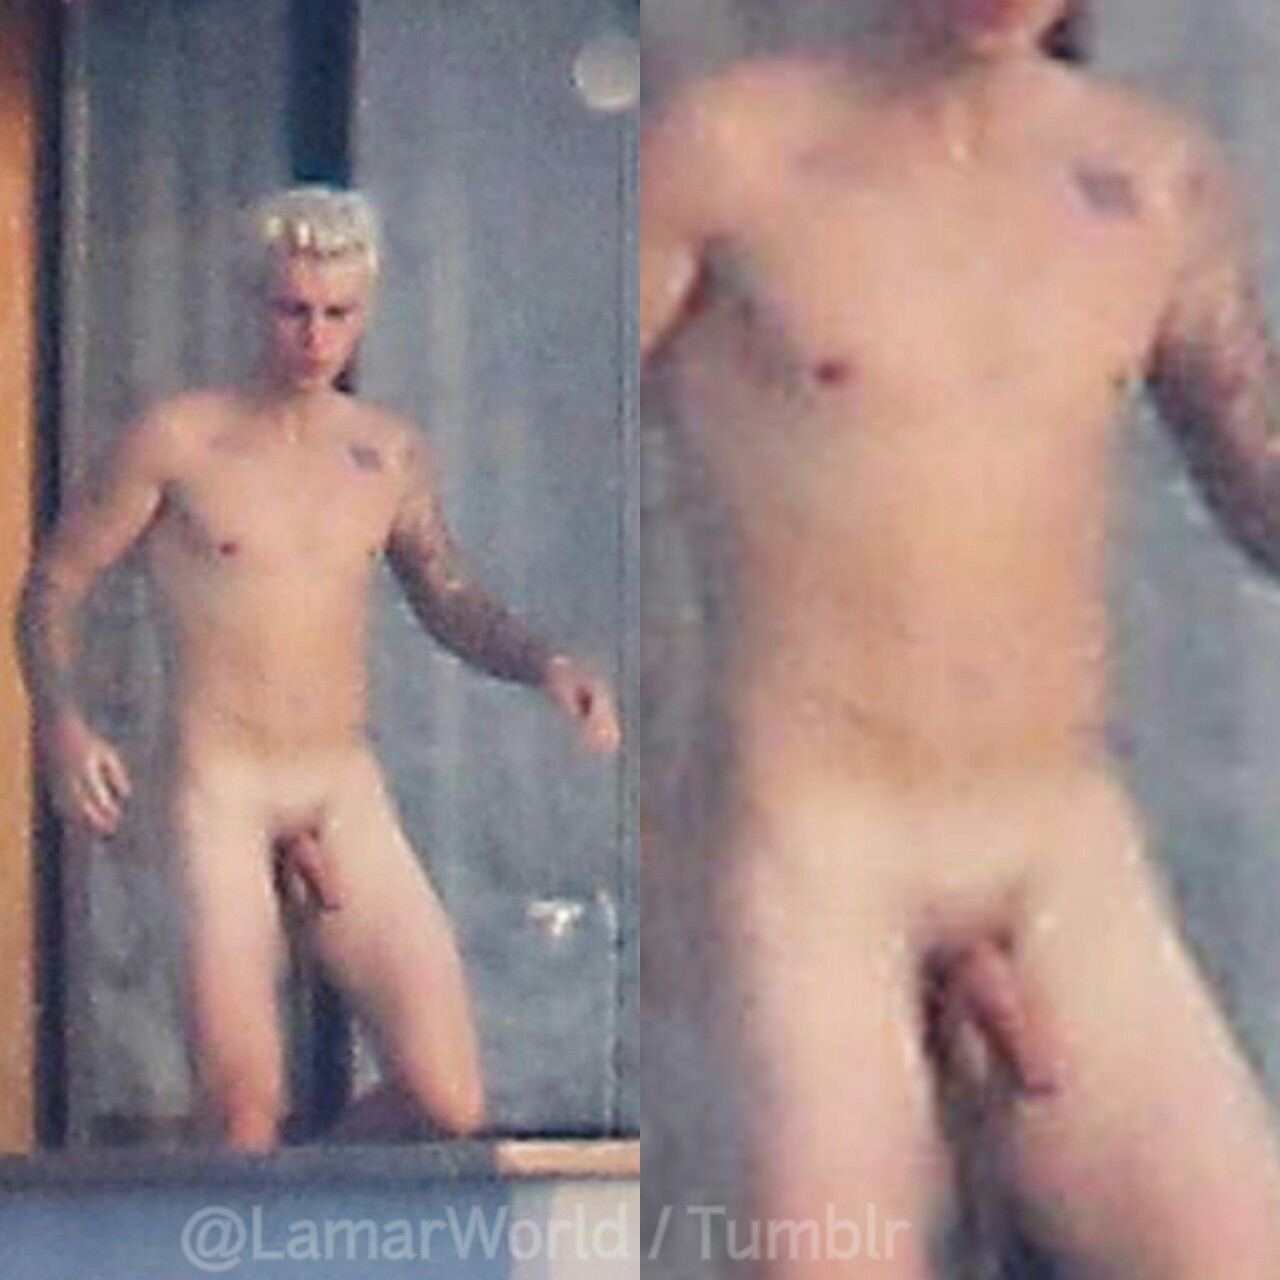 So Hot Justin Bieber Naked Leaked Pics